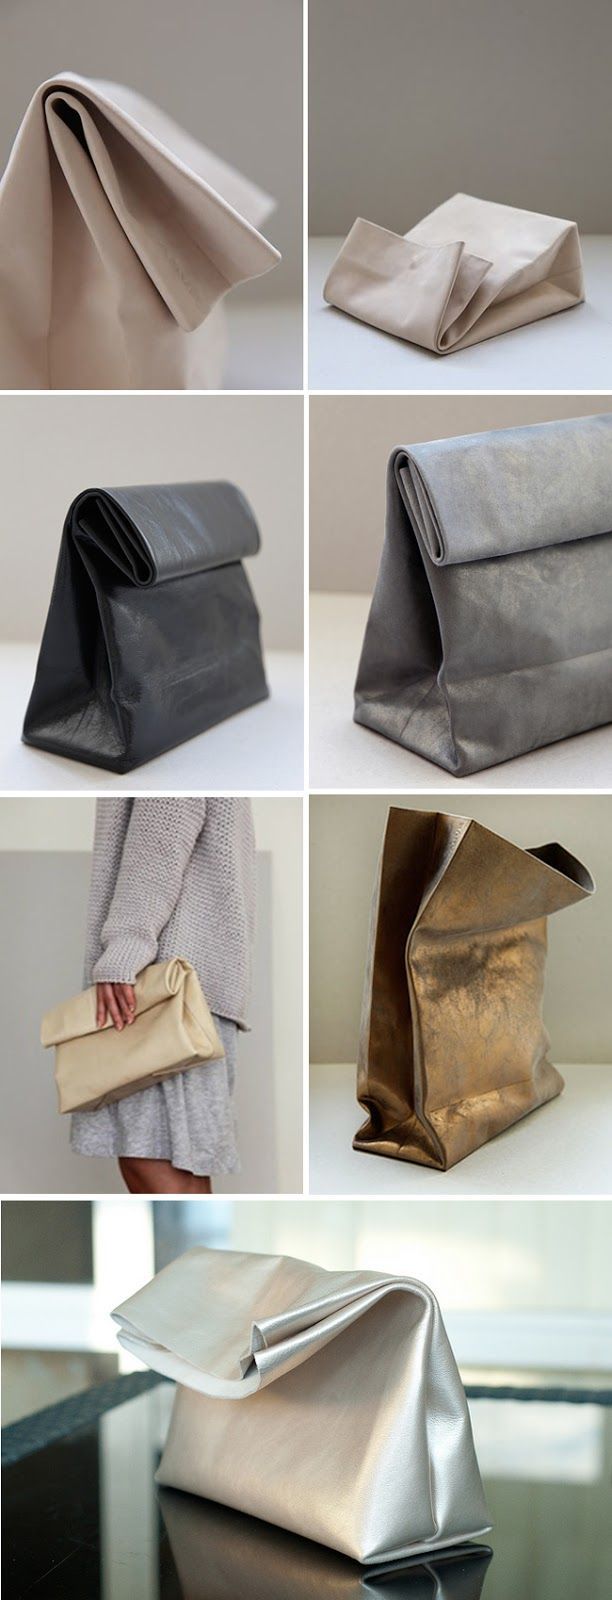 DIY paper bag like clutch. Unfortunately it only links to the blog, but it would